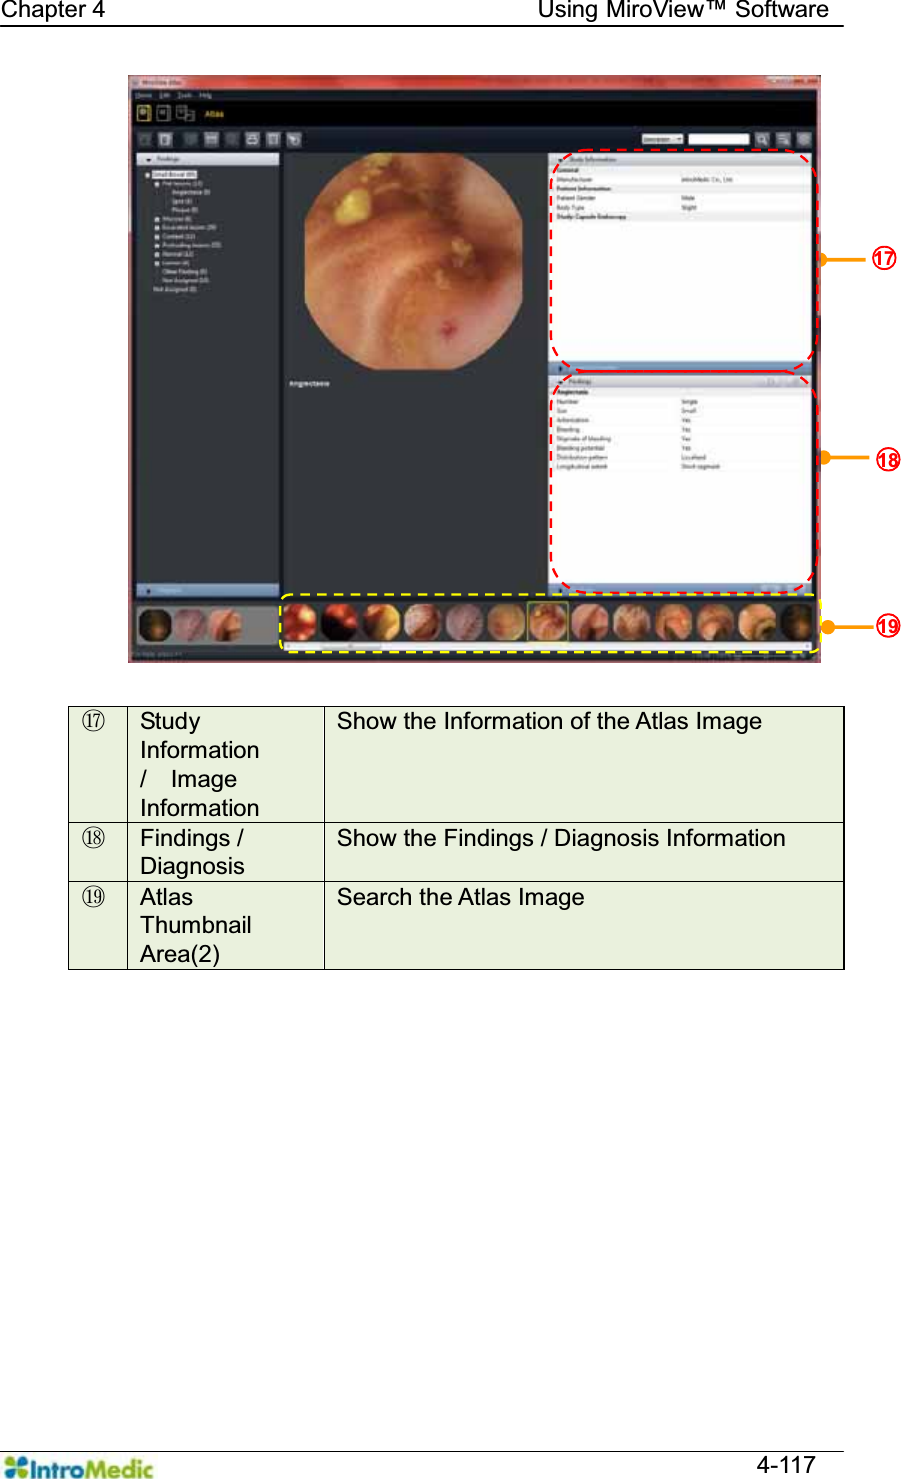   Chapter 4                                    Using 0LUR9LHZ Software  4-117  Ԩ  Study Information  /  Image  Information Show the Information of the Atlas Image ԩ Findings /   Diagnosis Show the Findings / Diagnosis Information Ԫ Atlas Thumbnail Area(2) Search the Atlas Image  ̺18  ̺19  ̺17  